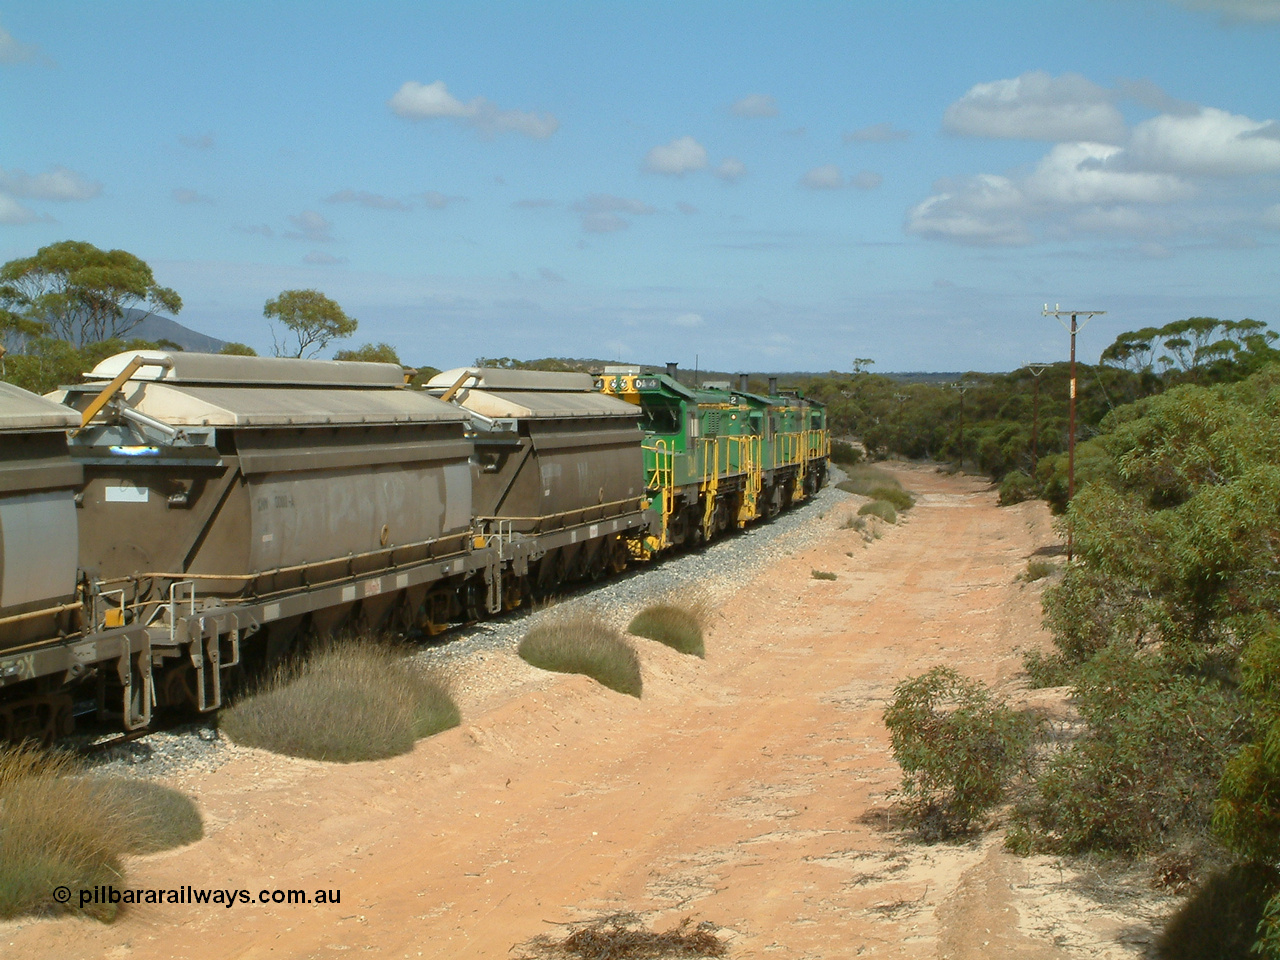 030409 110628
Caralue, loaded grain train working south of the former station site 830 class unit 851 AE Goodwin ALCo model DL531 serial 84137, 851 has spent its entire operating career on the Eyre Peninsula, it leads fellow 830 class 842 serial 84140 and a rebuilt unit DA 4, rebuilt from 830 class unit 839 by Port Augusta Workshops, retains original serial 83730 and model DL531.
Keywords: DA-class;DA4;83730;Port-Augusta-WS;ALCo;DL531G/1;830-class;839;rebuild;